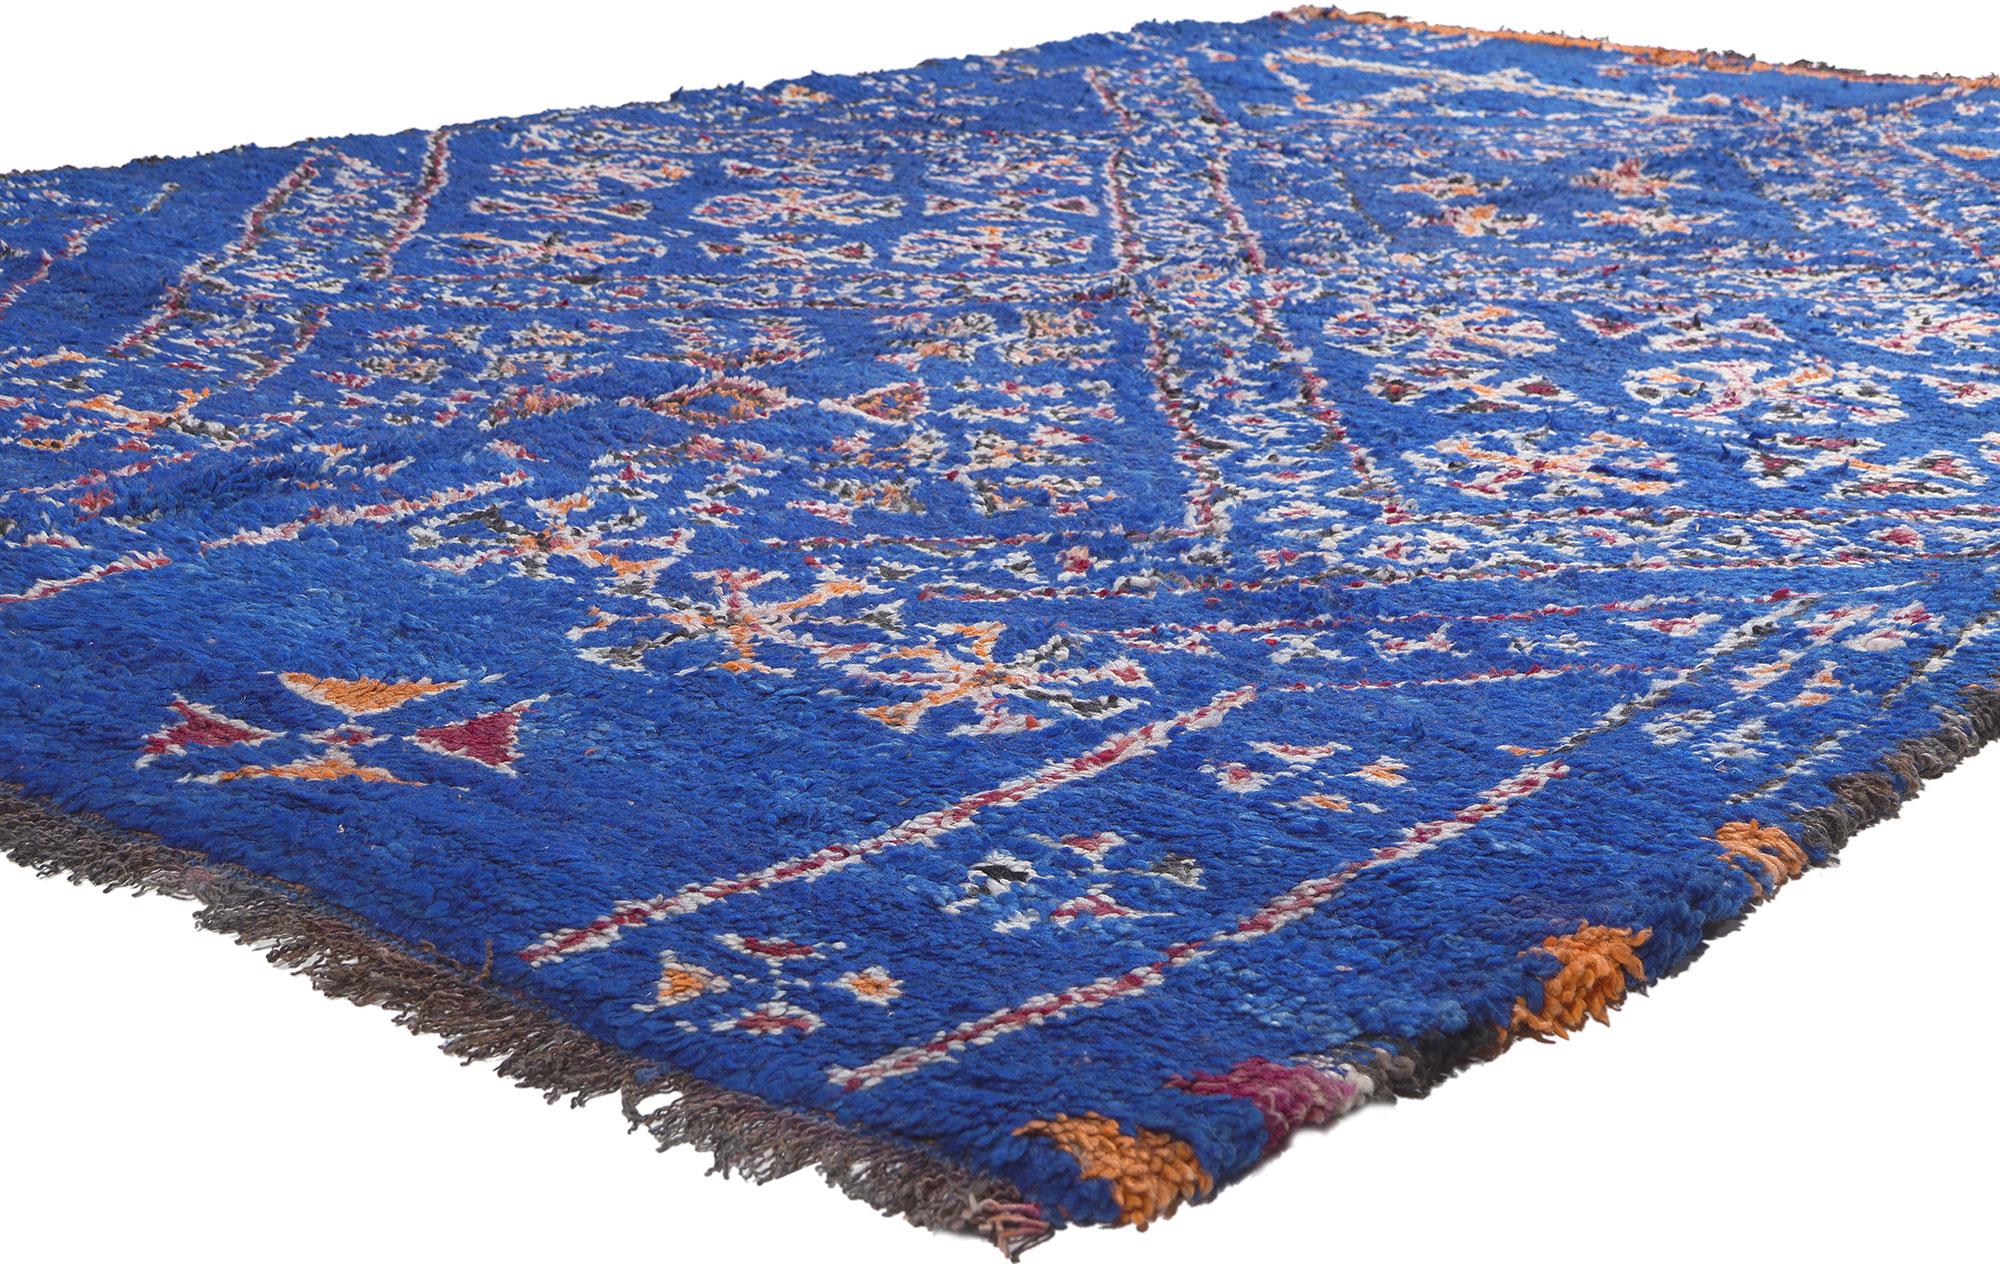 21034 Vintage Blue Beni Mguild Moroccan Rug, 06'10 x 10'06. Woven with the enchanting expertise of Berber women from the Ait M'Guild tribe in the mystical Atlas Mountains of Morocco, Beni Mguild rugs are revered for their masterful craftsmanship and